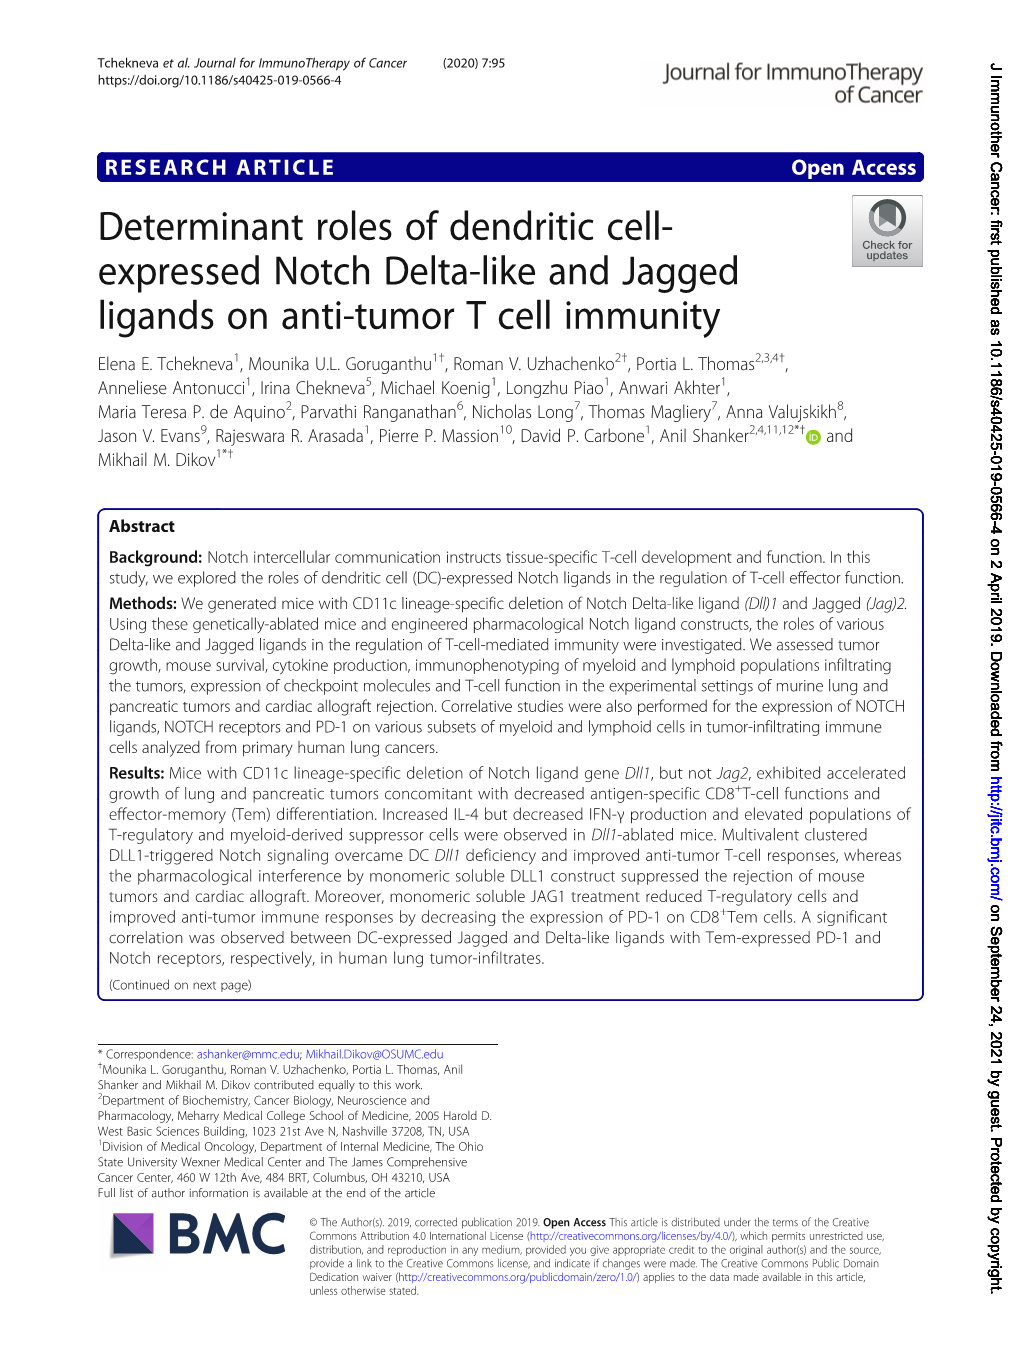 Determinant Roles of Dendritic Cell-Expressed Notch Delta-Like and Jagged Ligands on Anti-Tumor T-Cell Immunity Elena E